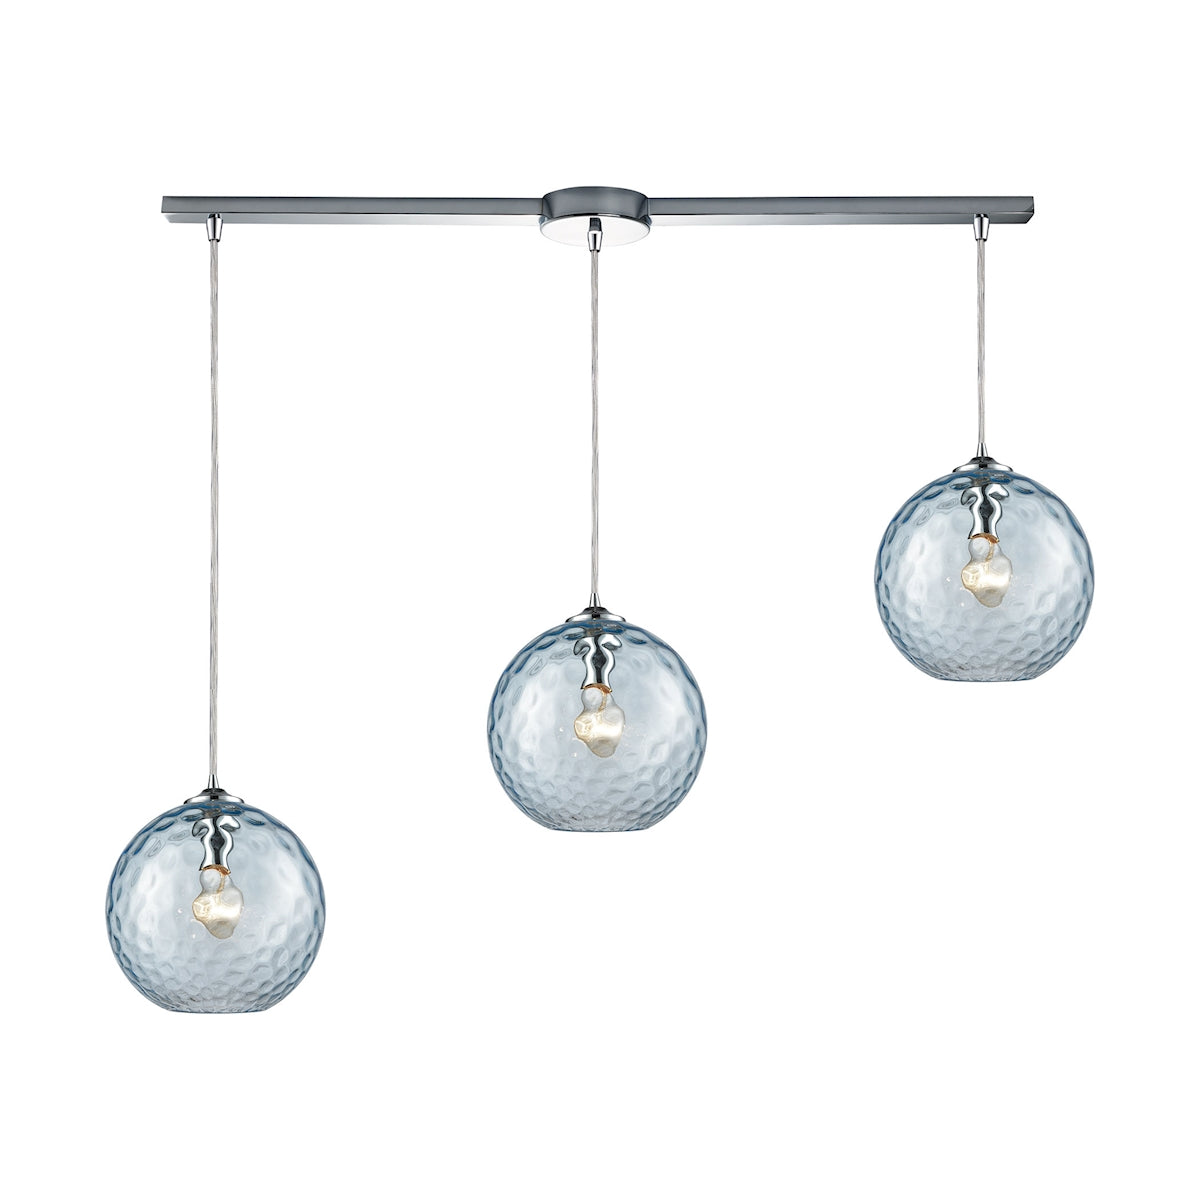 ELK Lighting 31380/3L-AQ - Watersphere 36" Wide 3-Light Linear Mini Pendant Fixture in Chrome with H